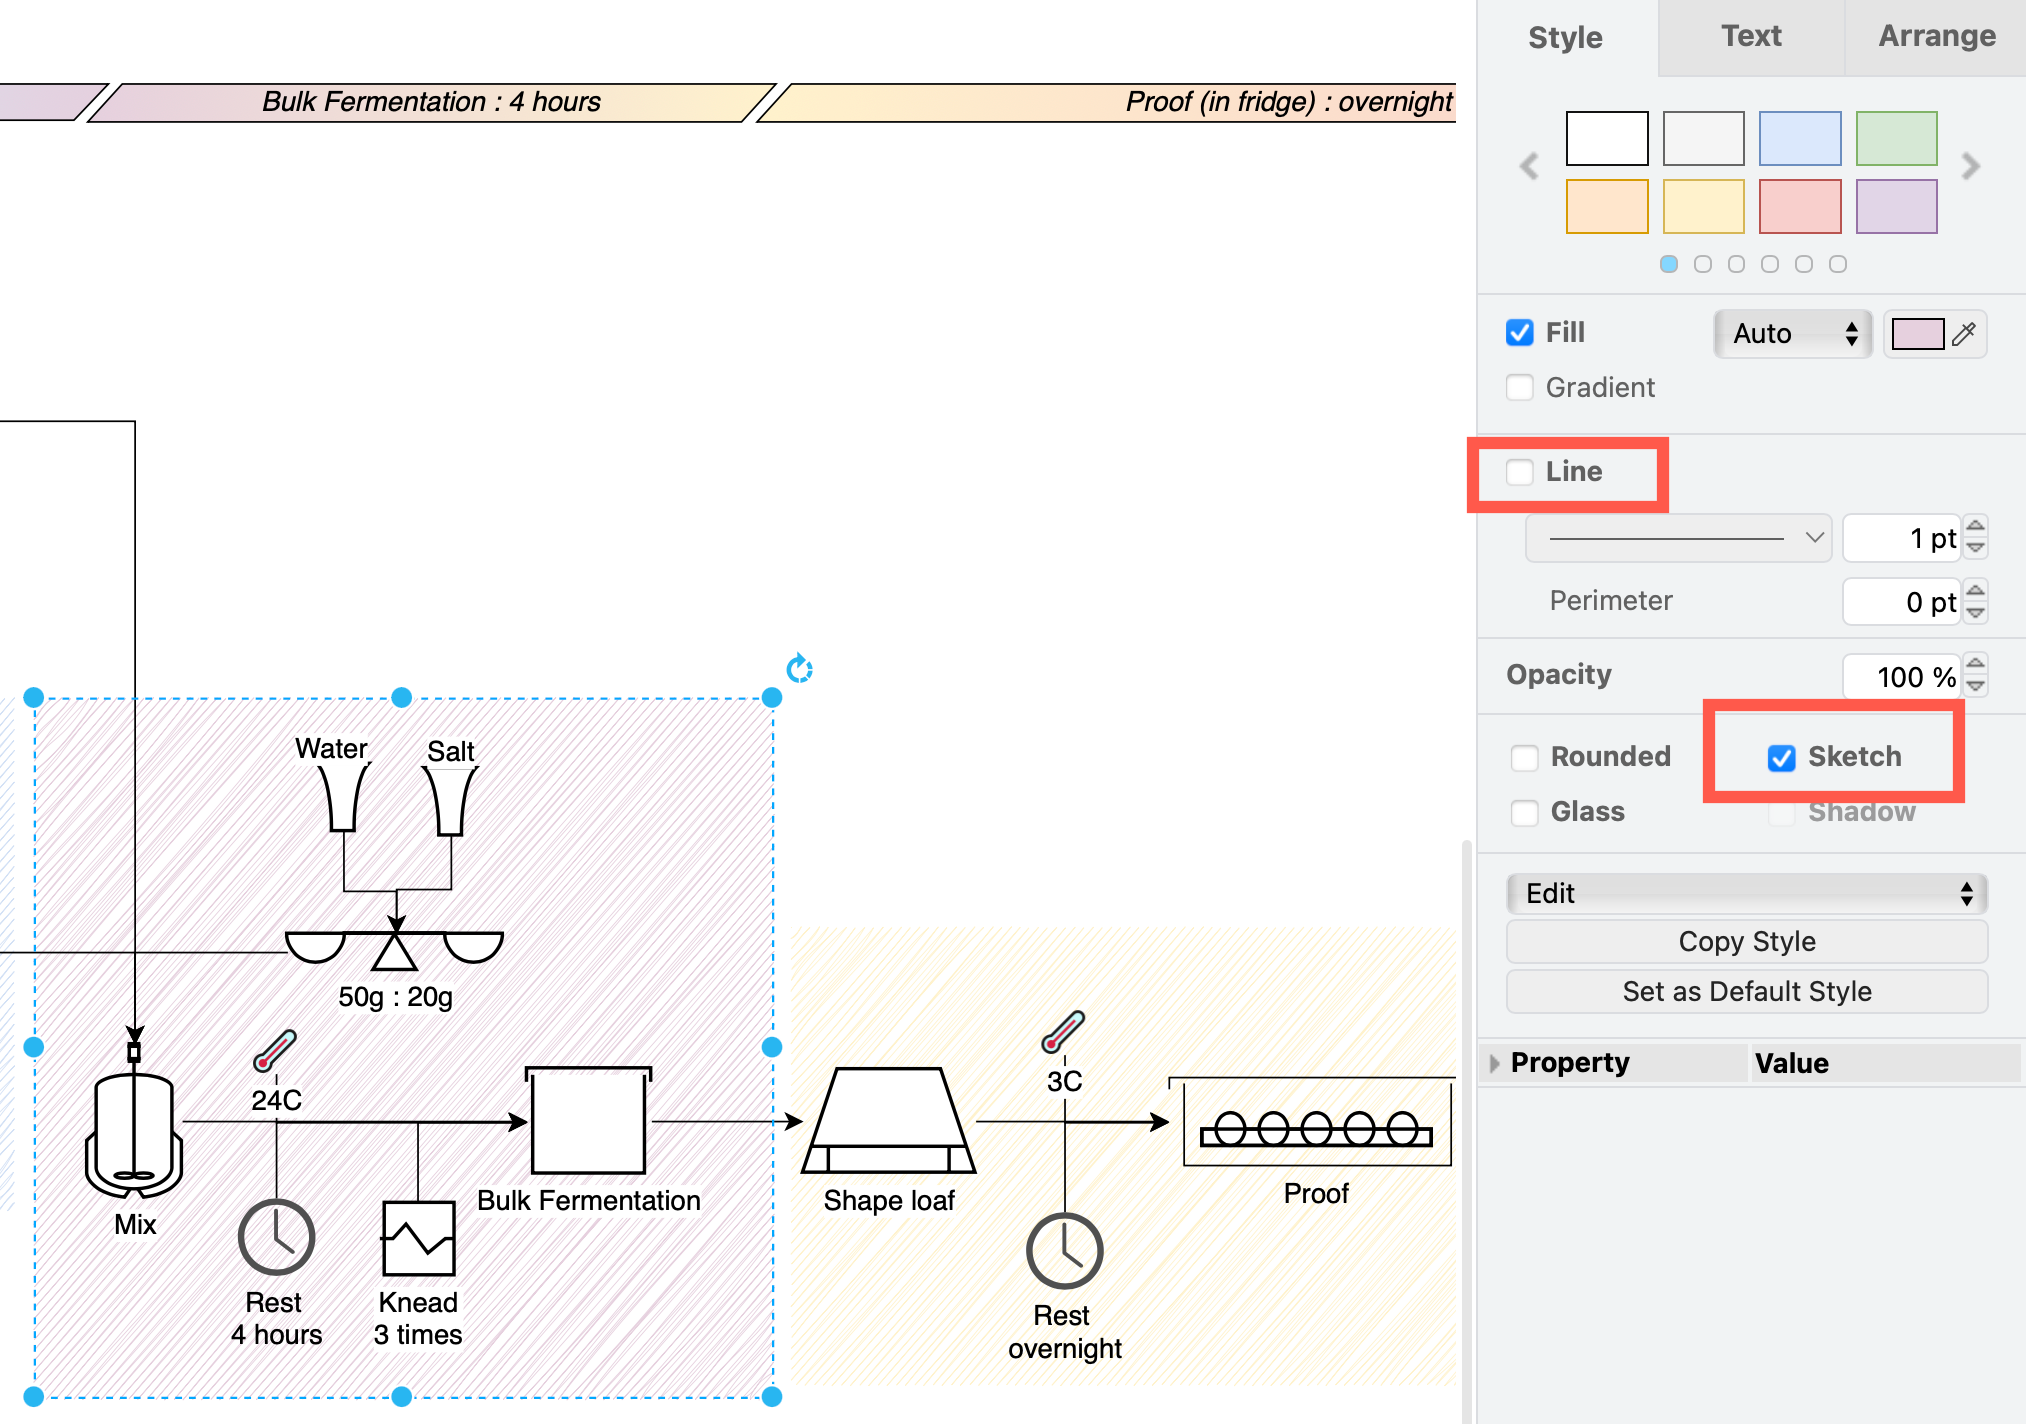 Use sketch rectangles without an outline behind your process shapes to indicate regions, or stations in your production line